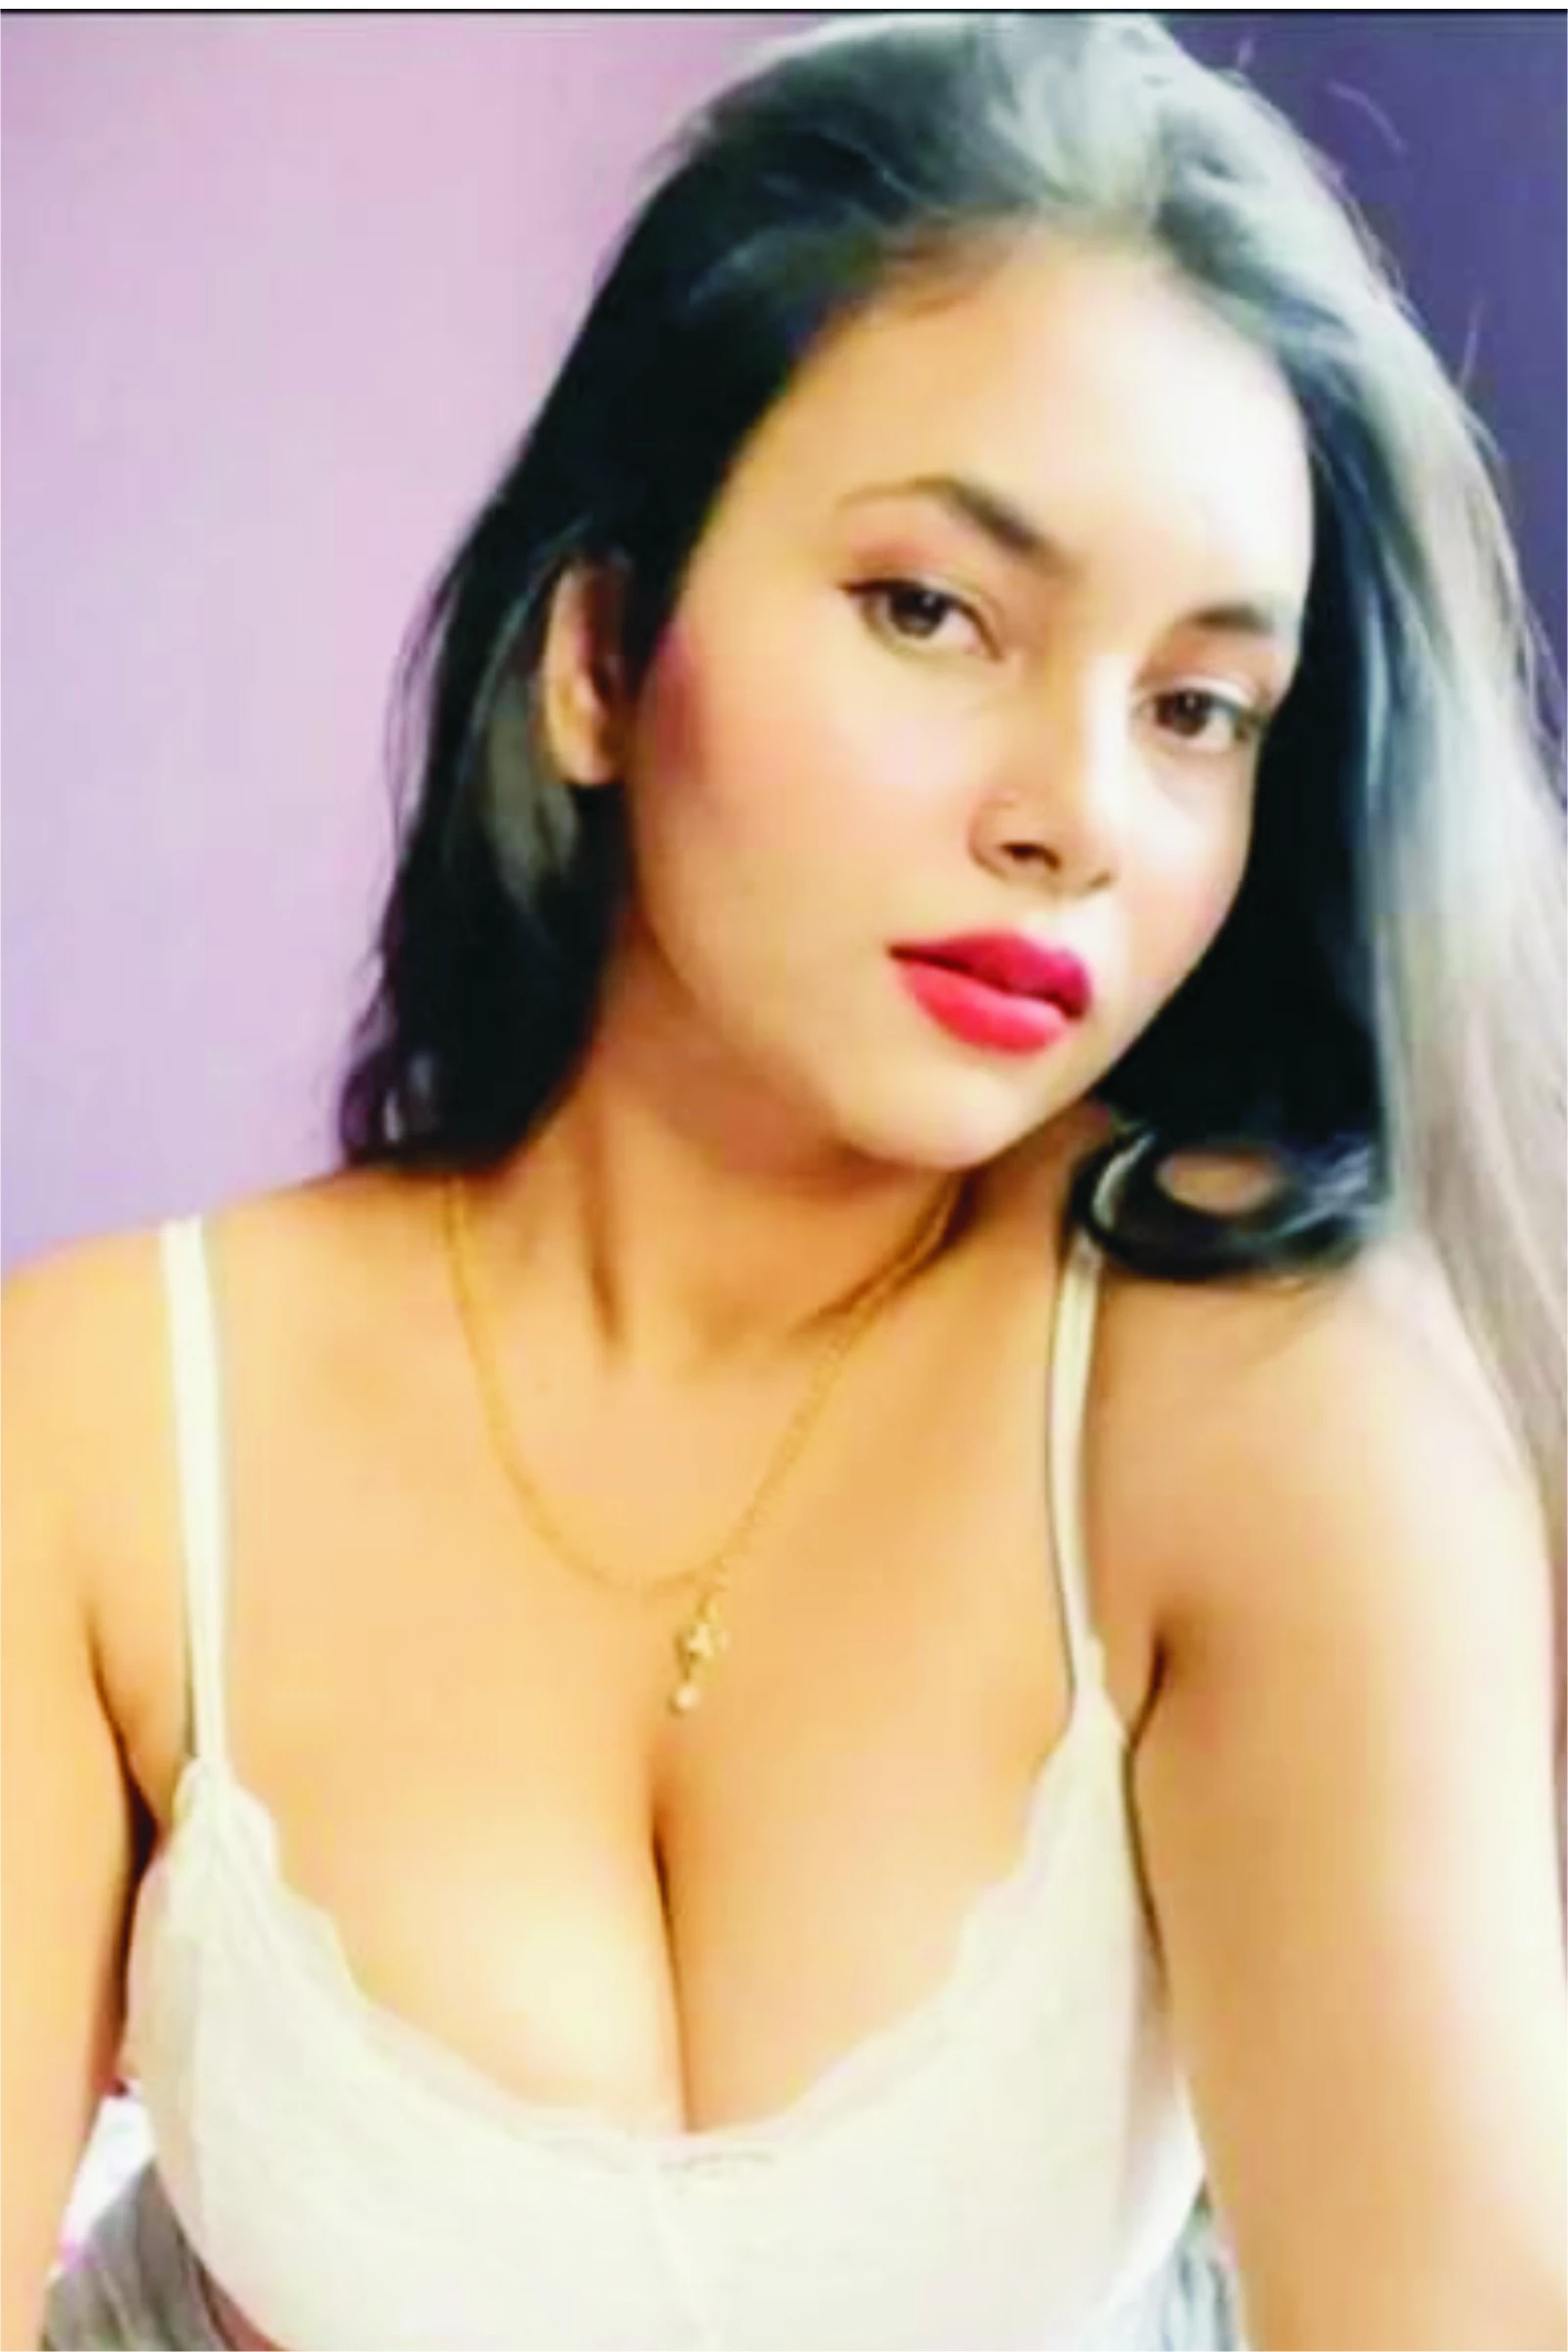 Jodhpur Call Girl With Full Enjoyment At Low Rates